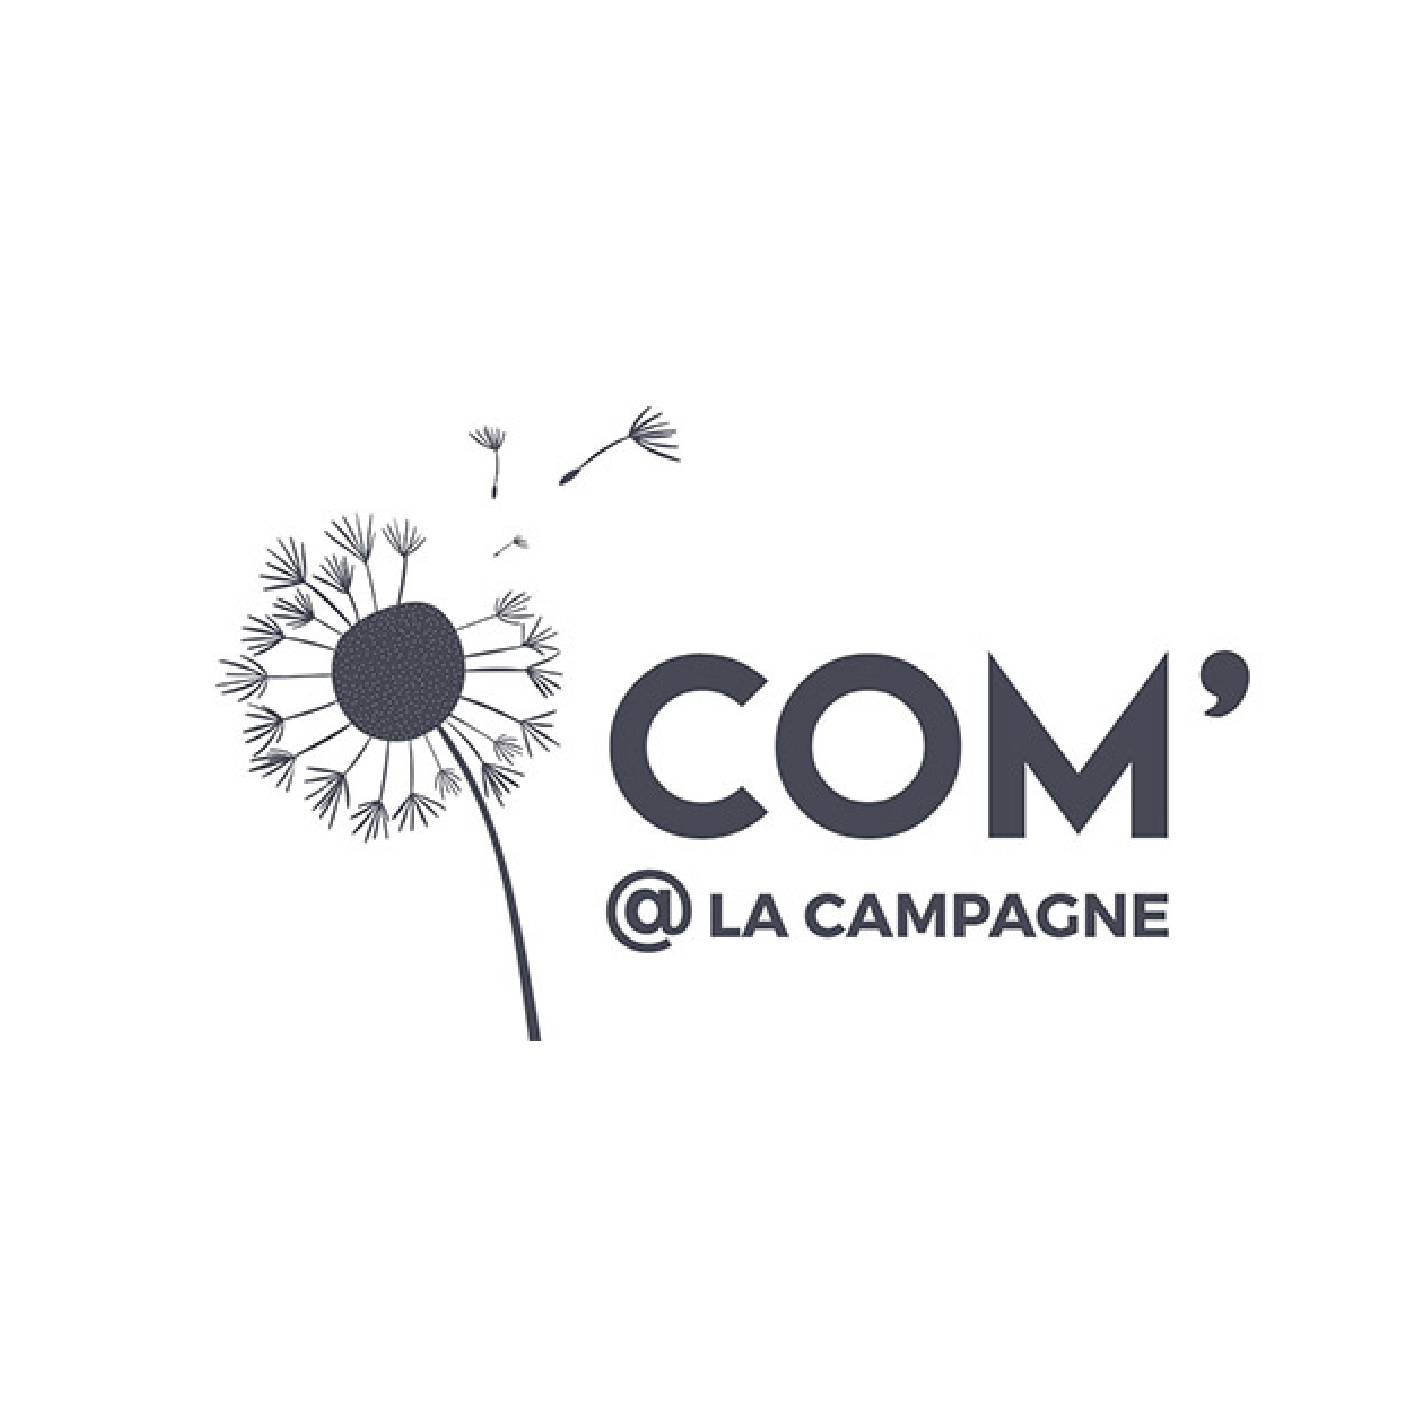 You are currently viewing COM’ @ la campagne